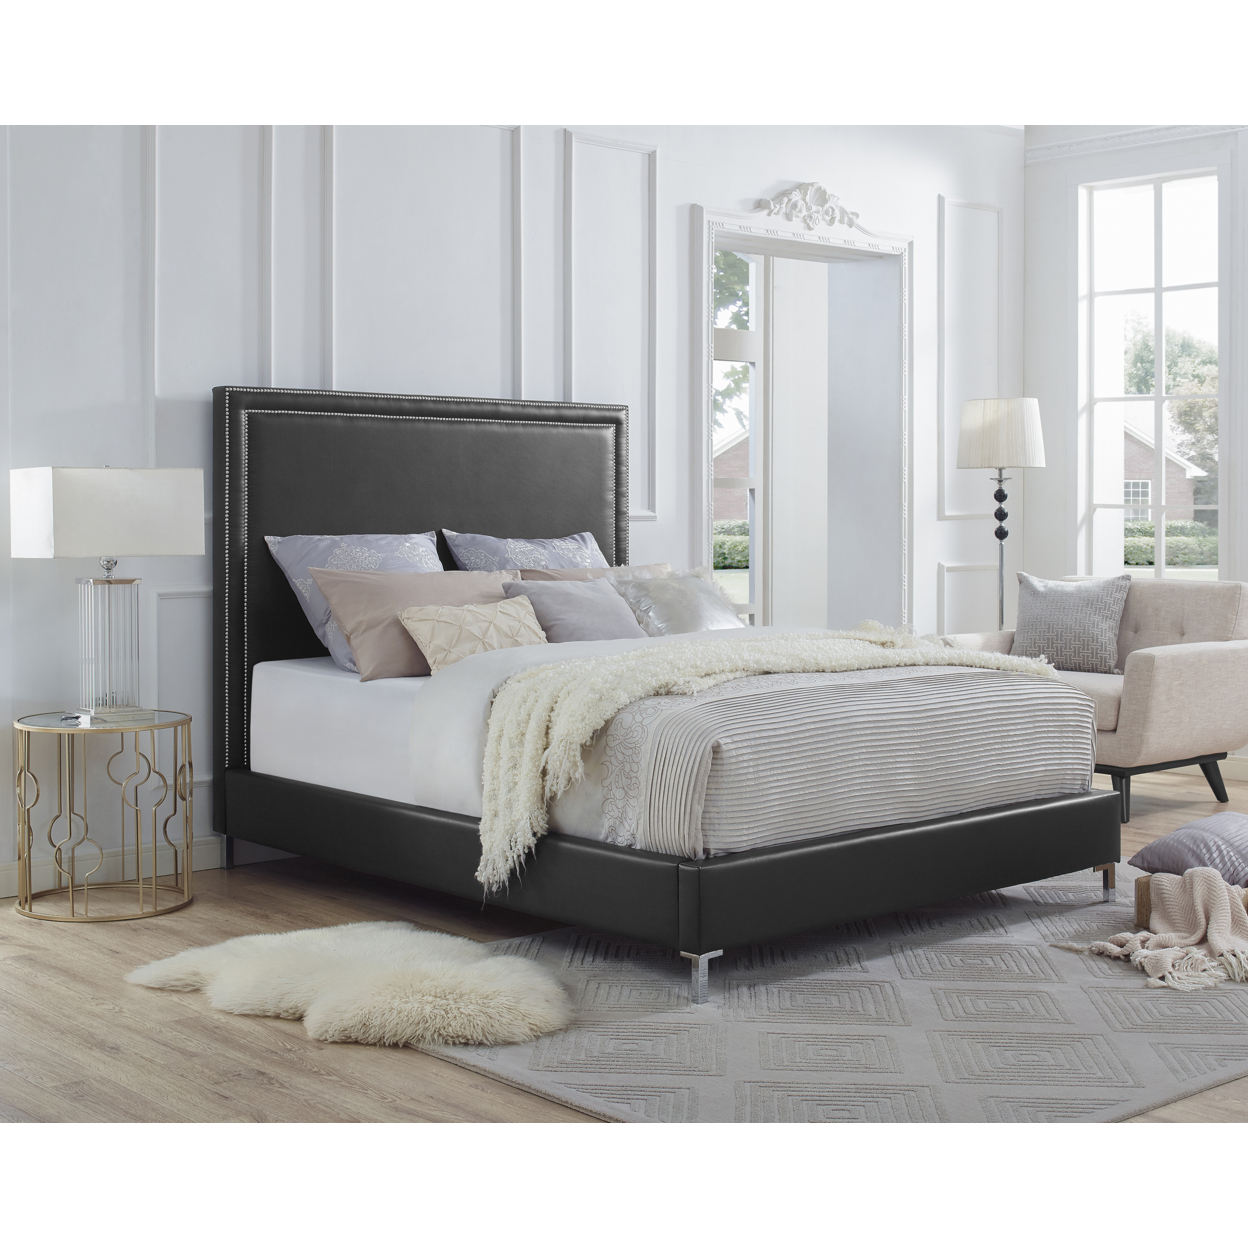 Valentina Leather PU Platform Bedframe-Nailhead Trim-King- Queen- Full- Twin Size-Inspired Home - Espresso, King